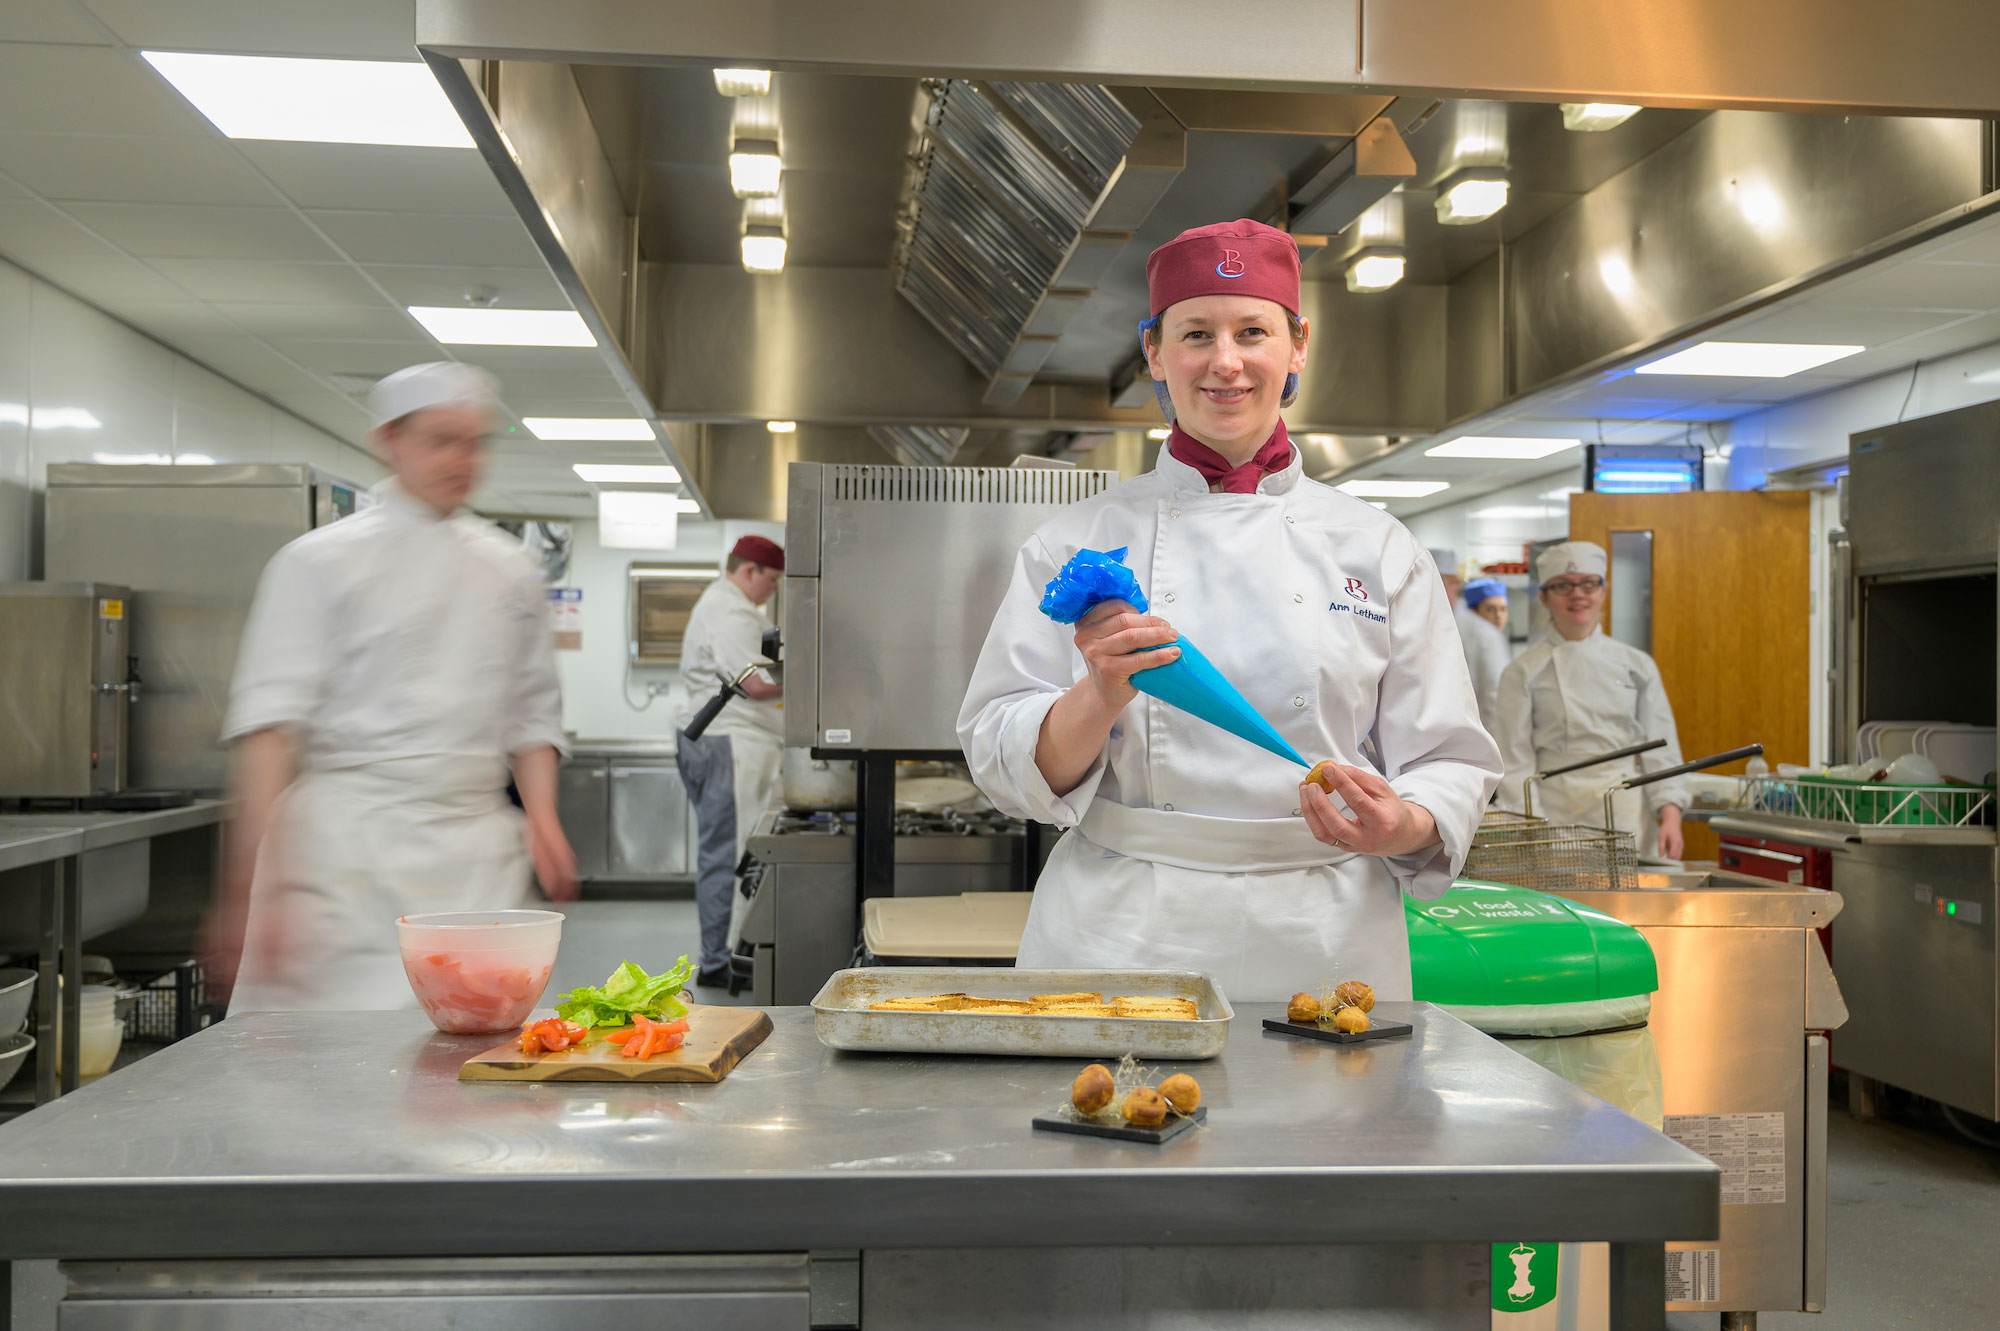 catering student stood in a kitchen, holding a piping bag